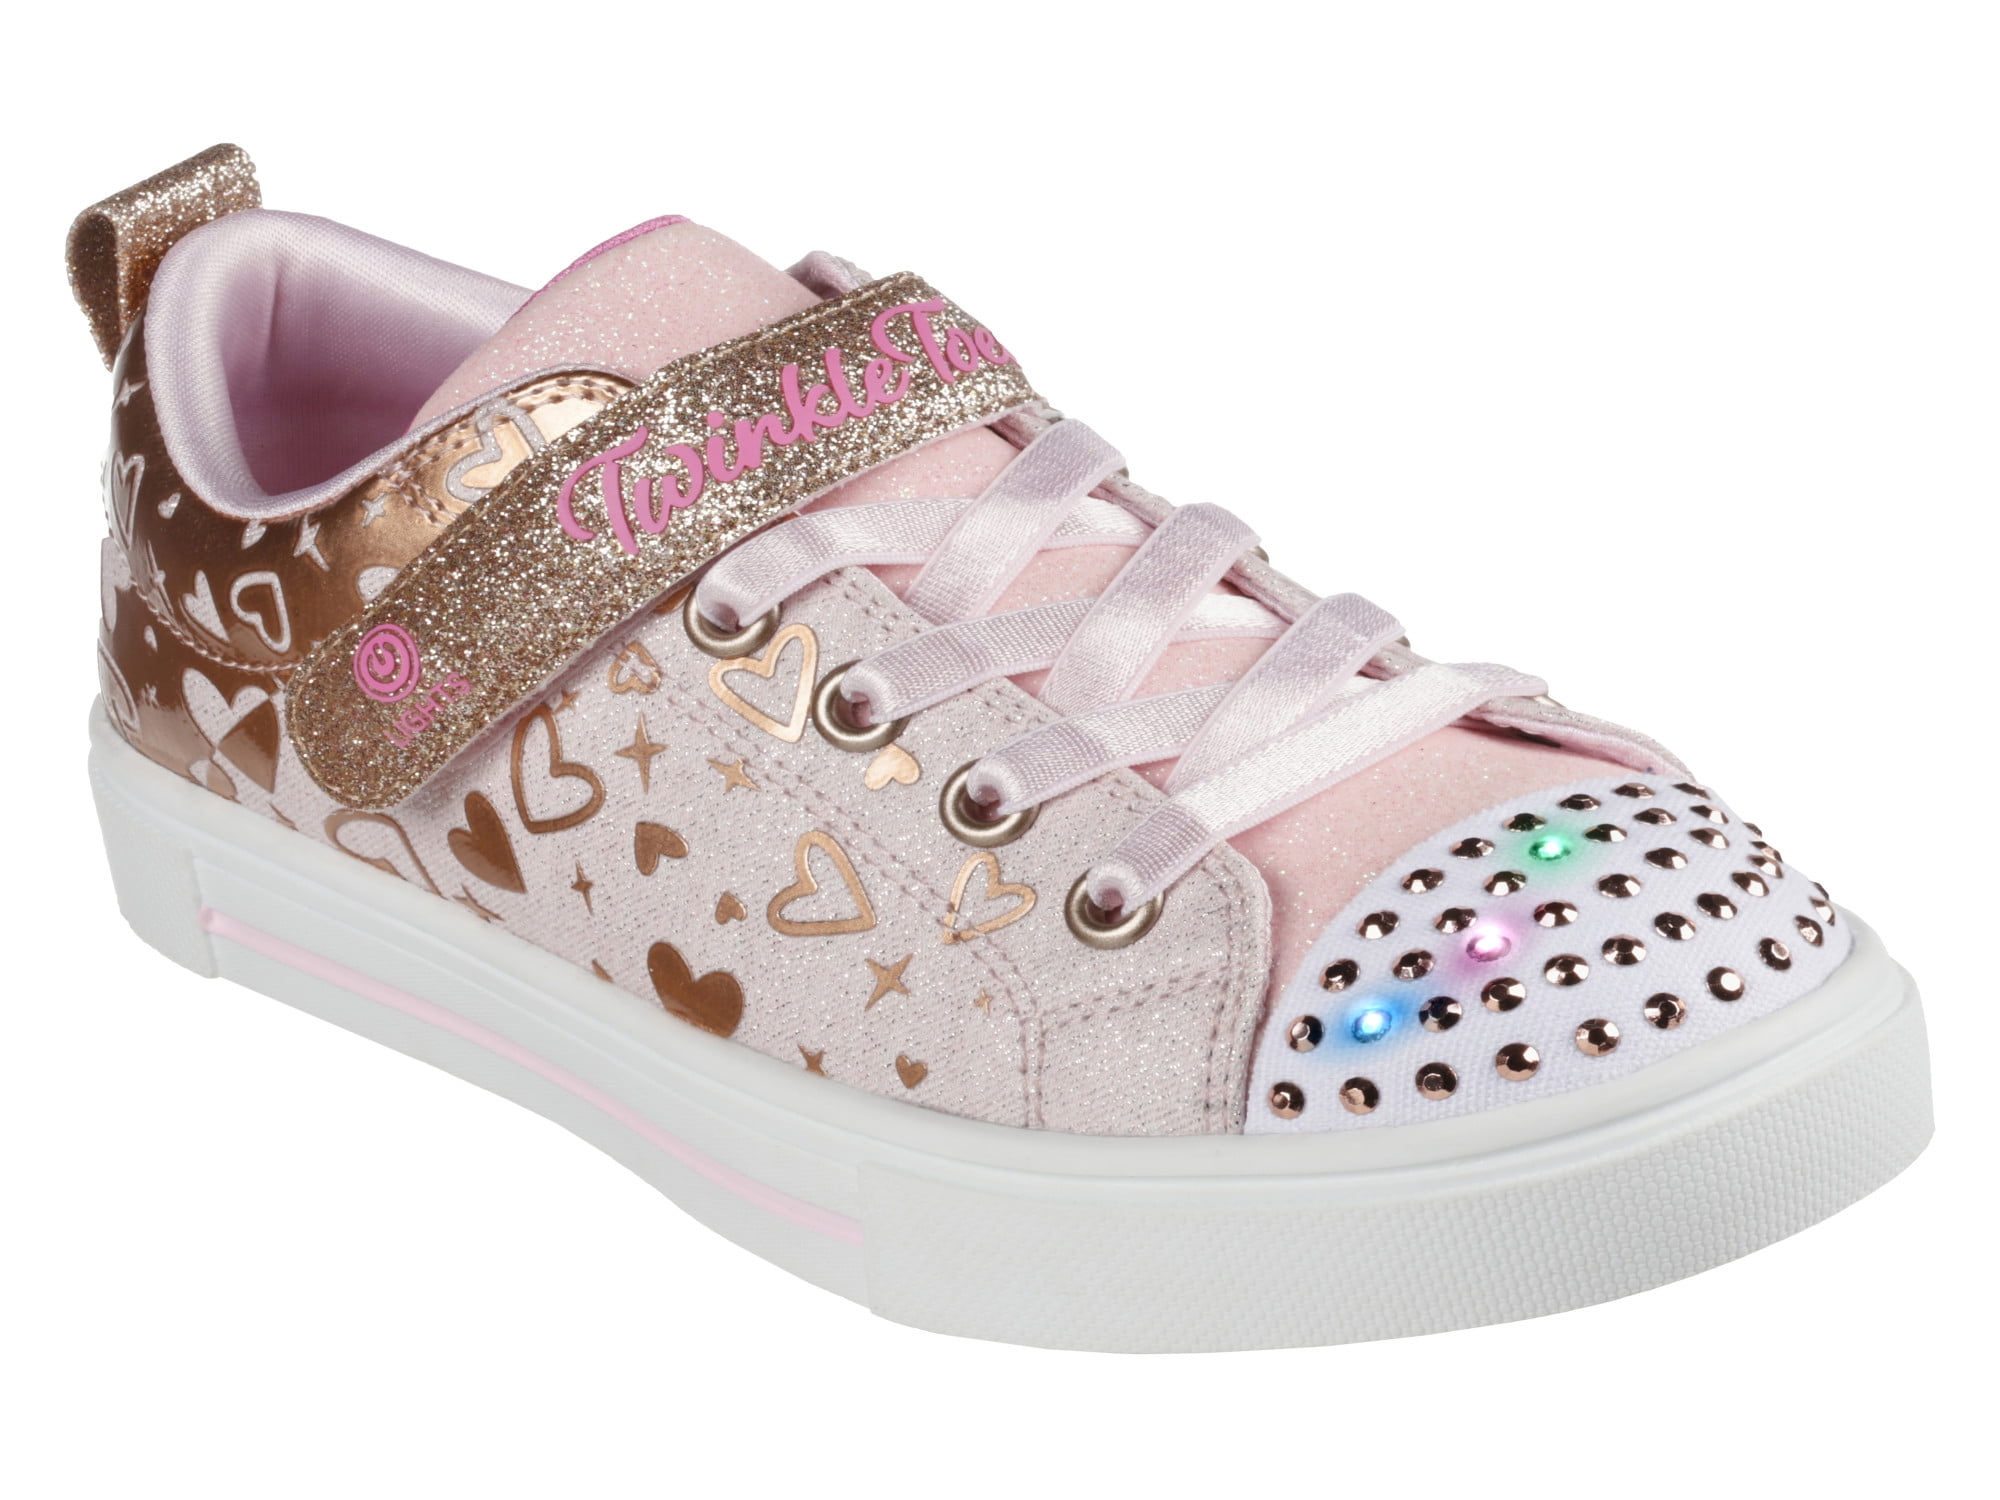 Girls Youth Twinkle Toes Light Sneakers - Heather Charm, Sizes 10.5-3 - Walmart.com